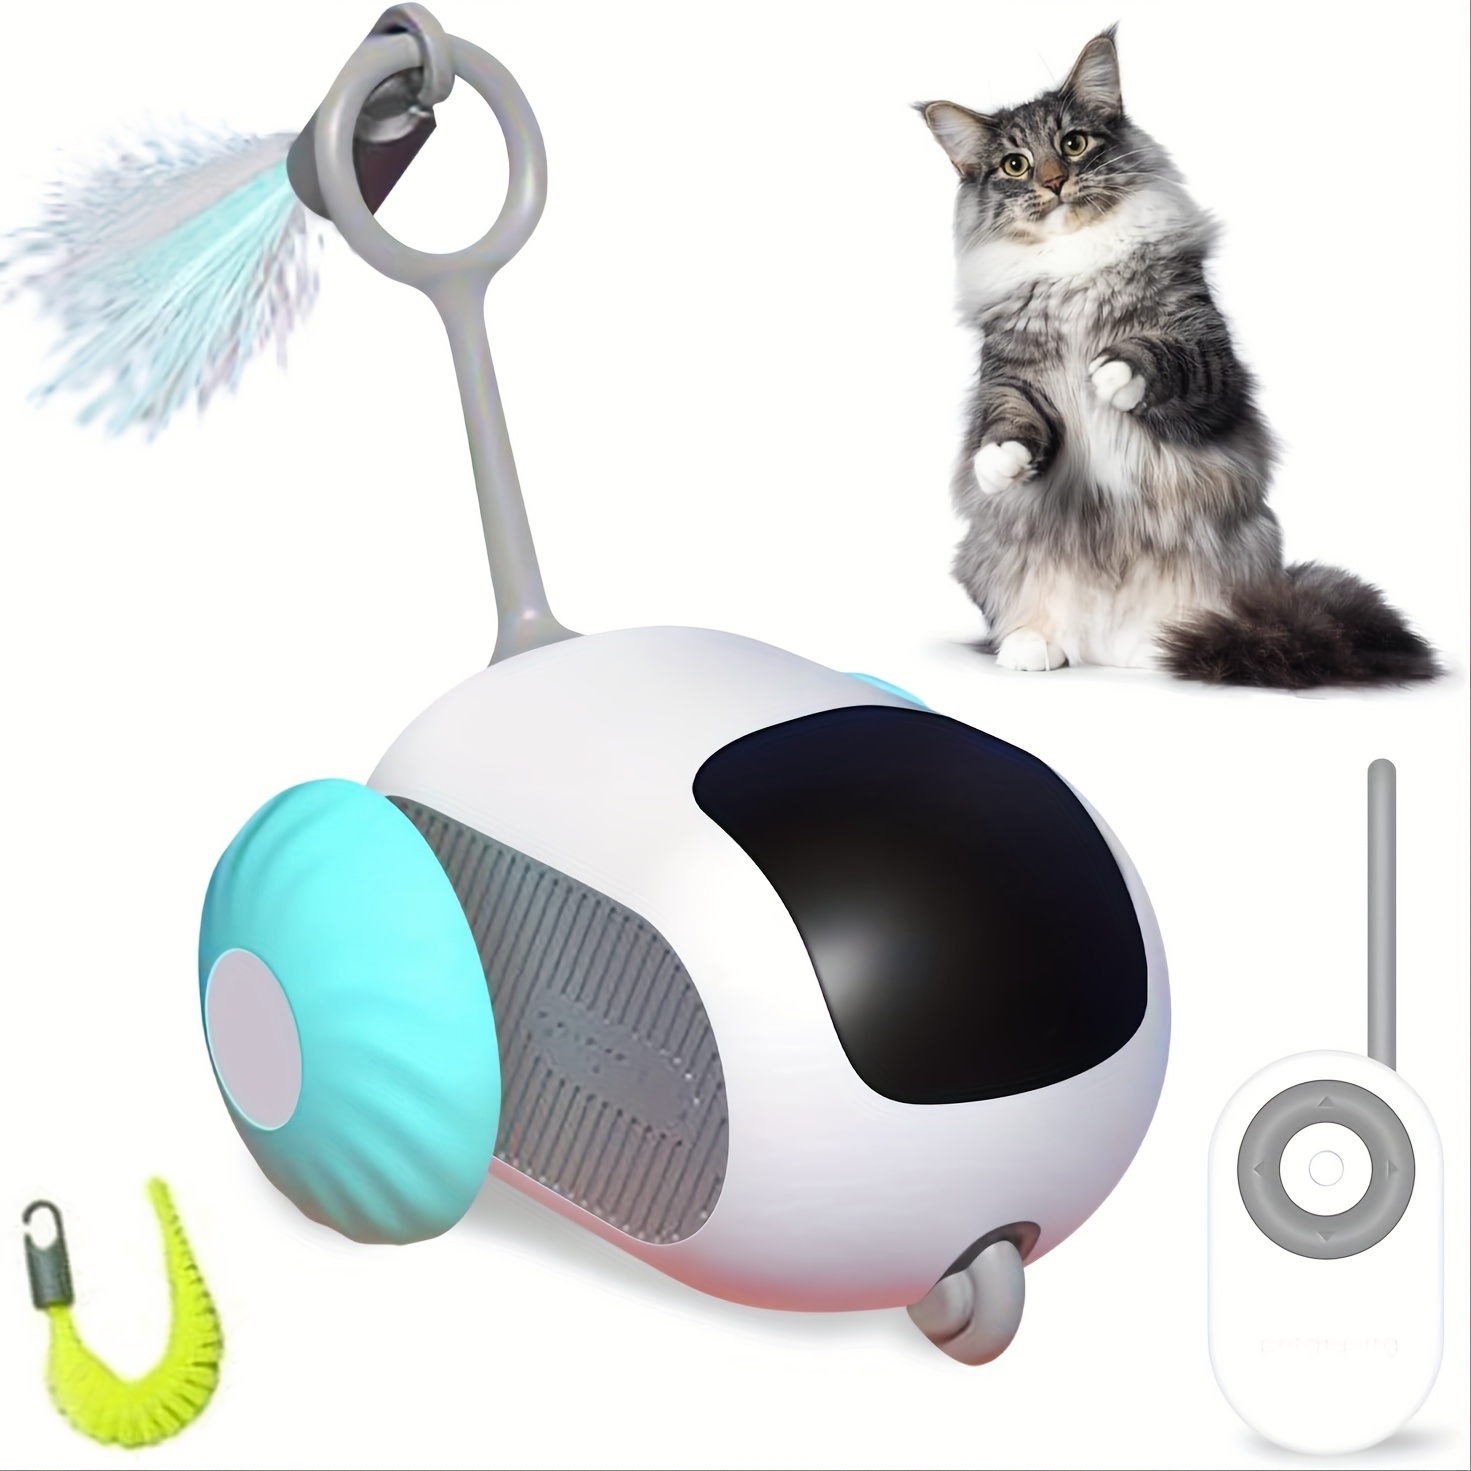 

Gravity Cat Toy Car Indoor Self-play Fun With Obstacle Avoidance & Infrared Sensor Magic